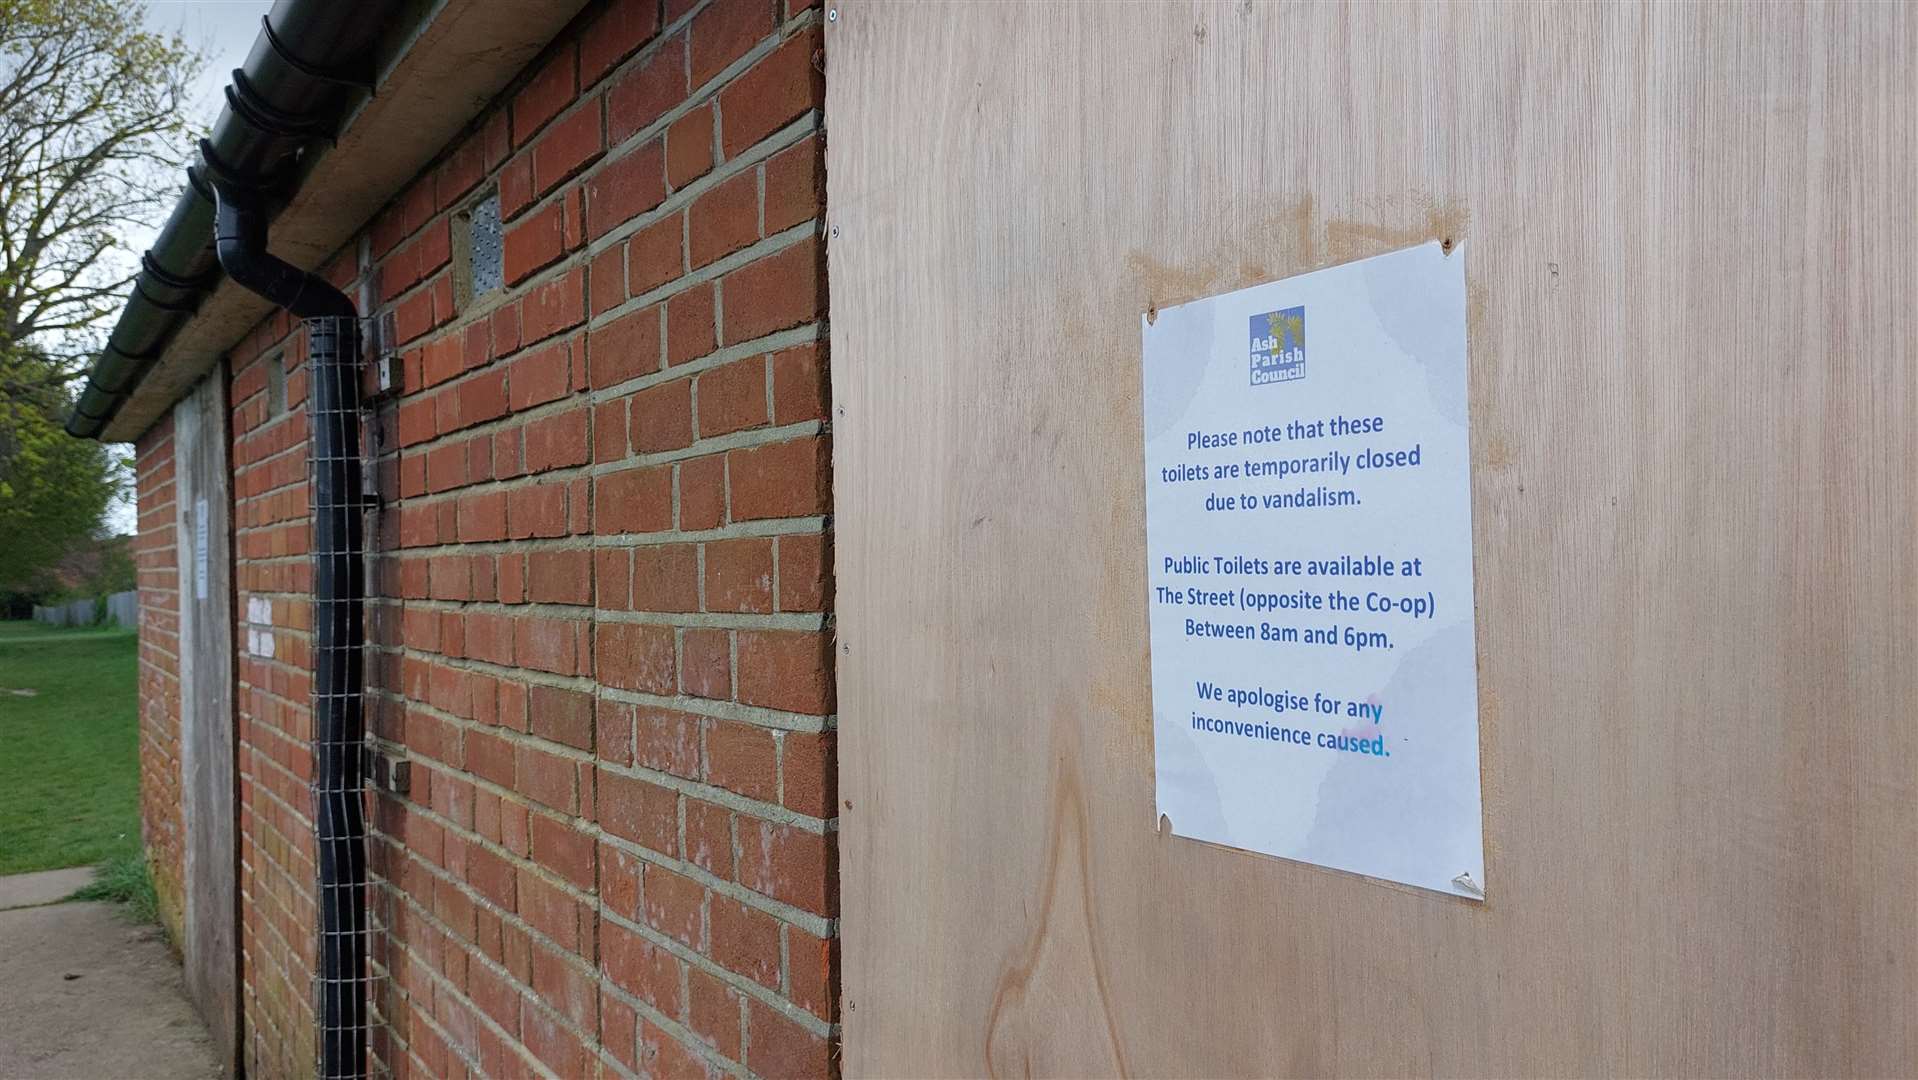 Notices have been placed on the public loos in the recreation ground